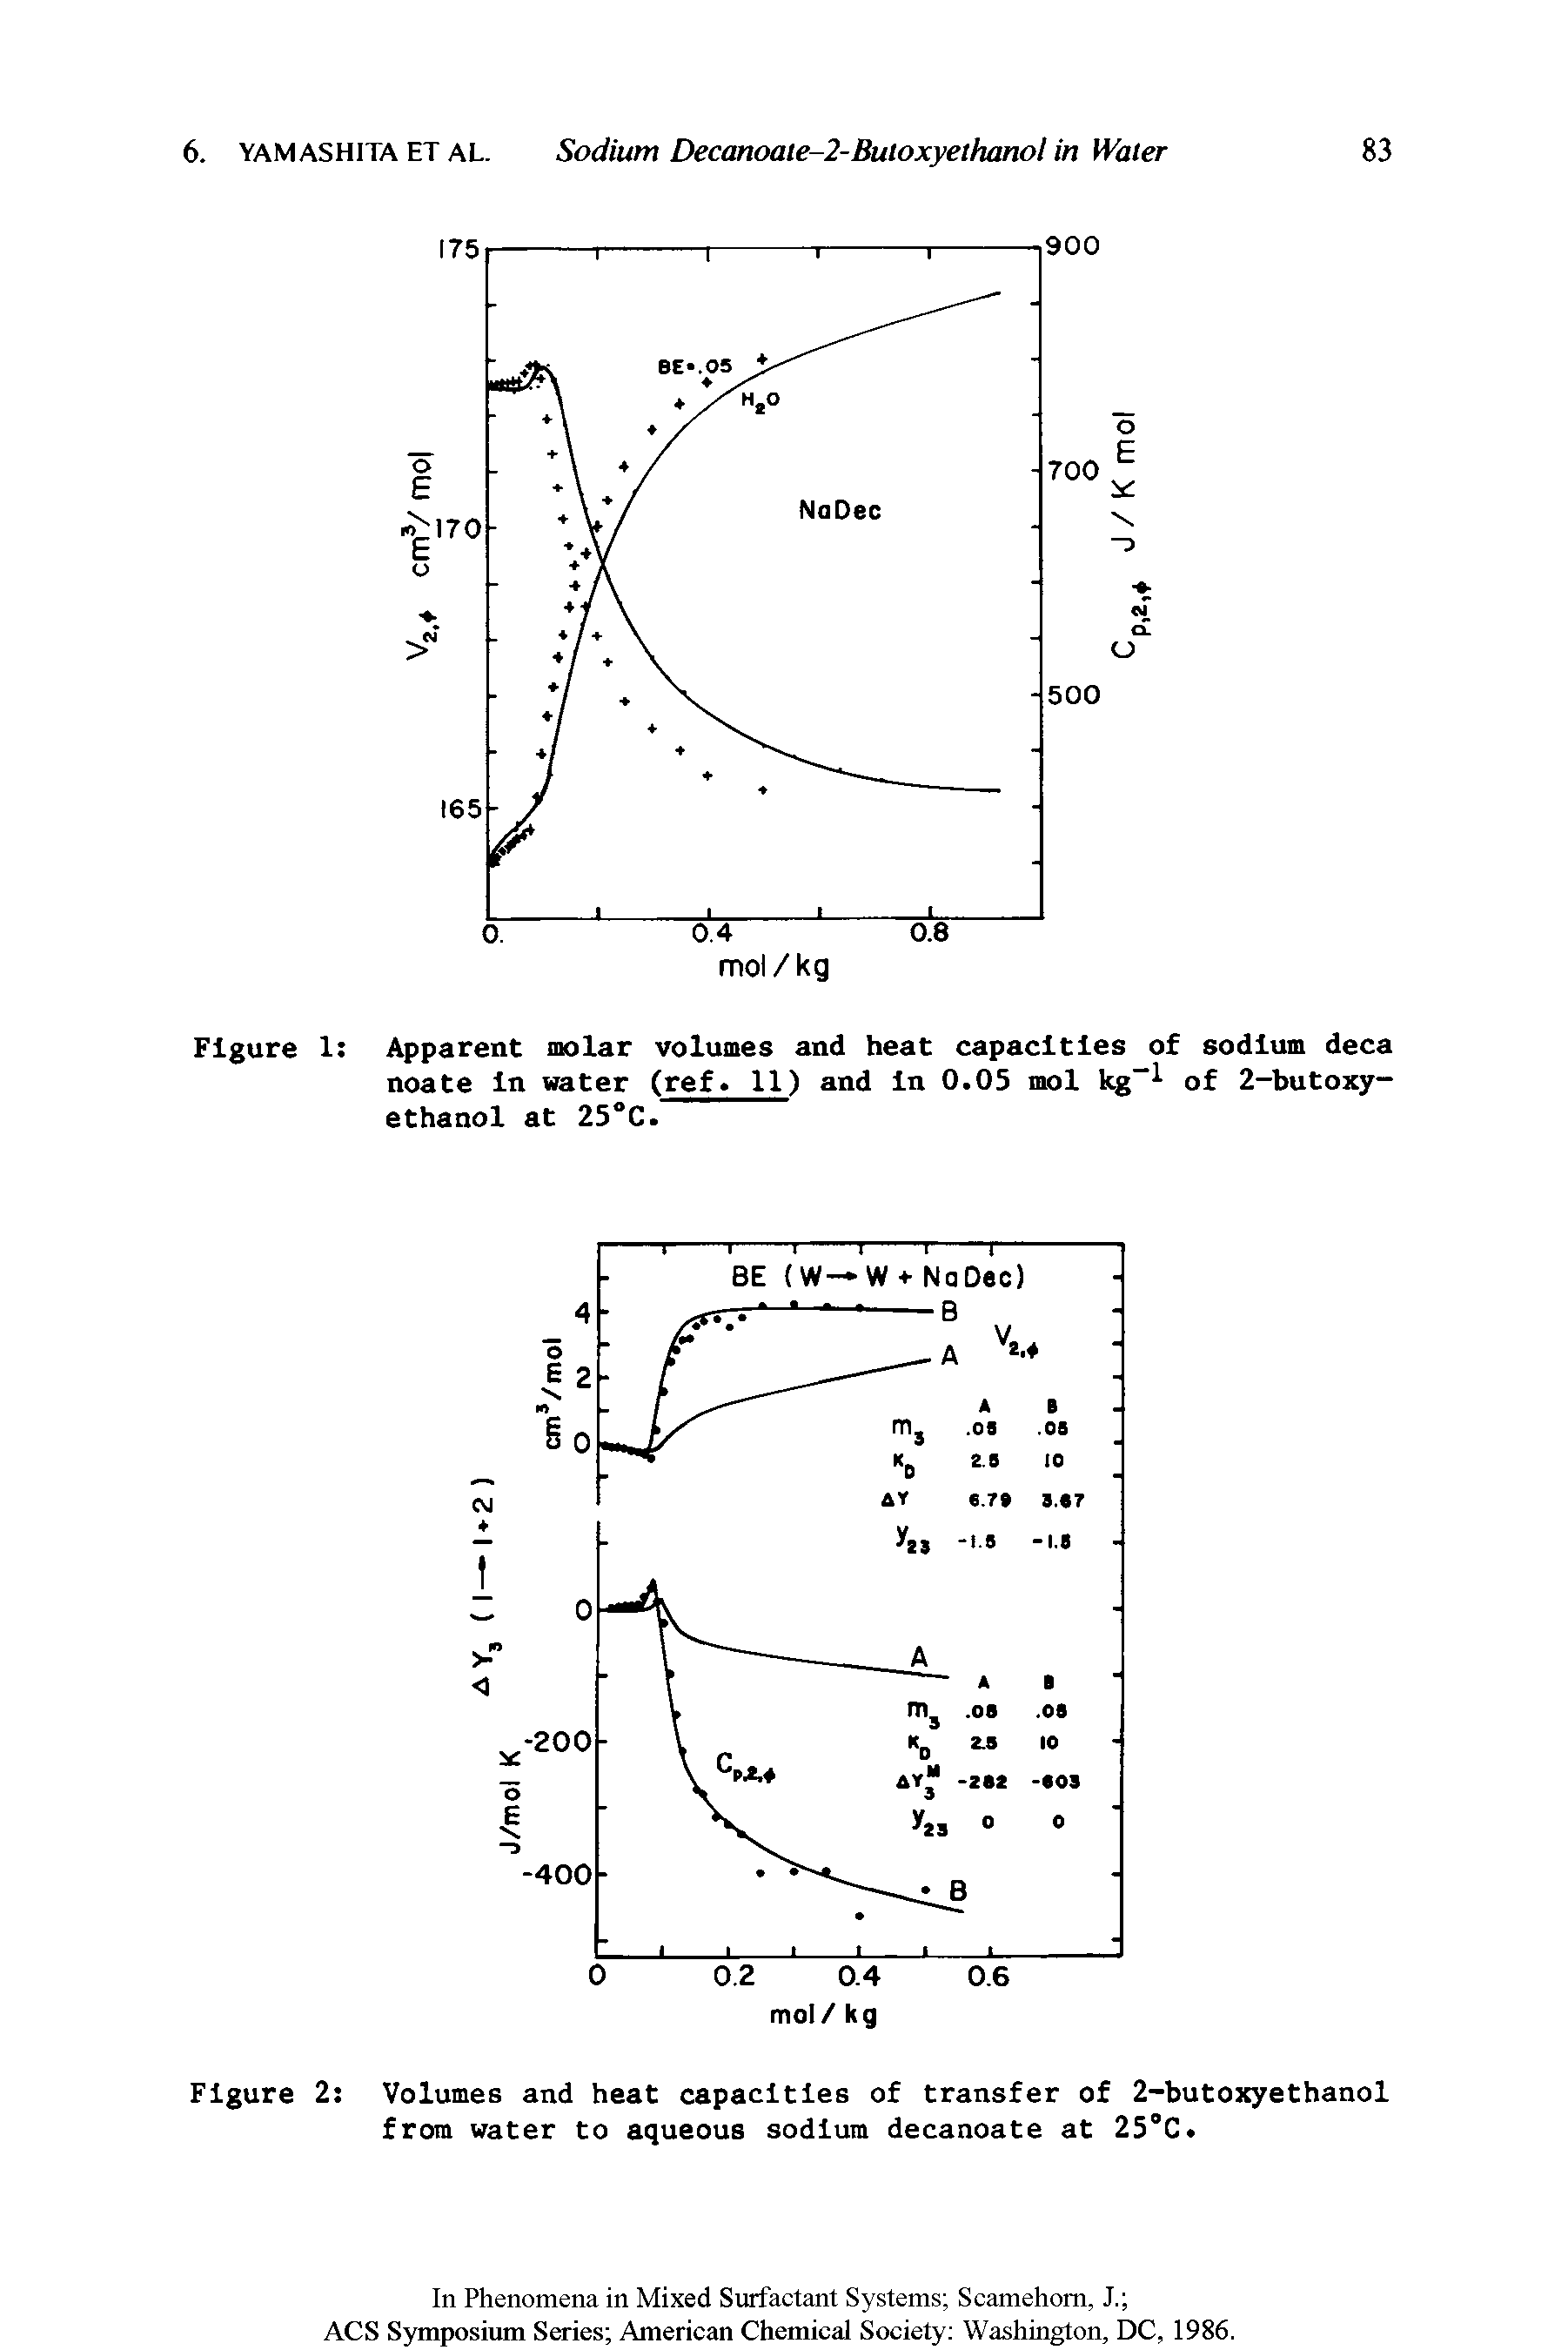 Figure 1 Apparent molar volumes and heat capacities of sodium deca noate In water (ref. 11) and In 0.05 mol kg of 2-butoxy-ethanol at 25°C.